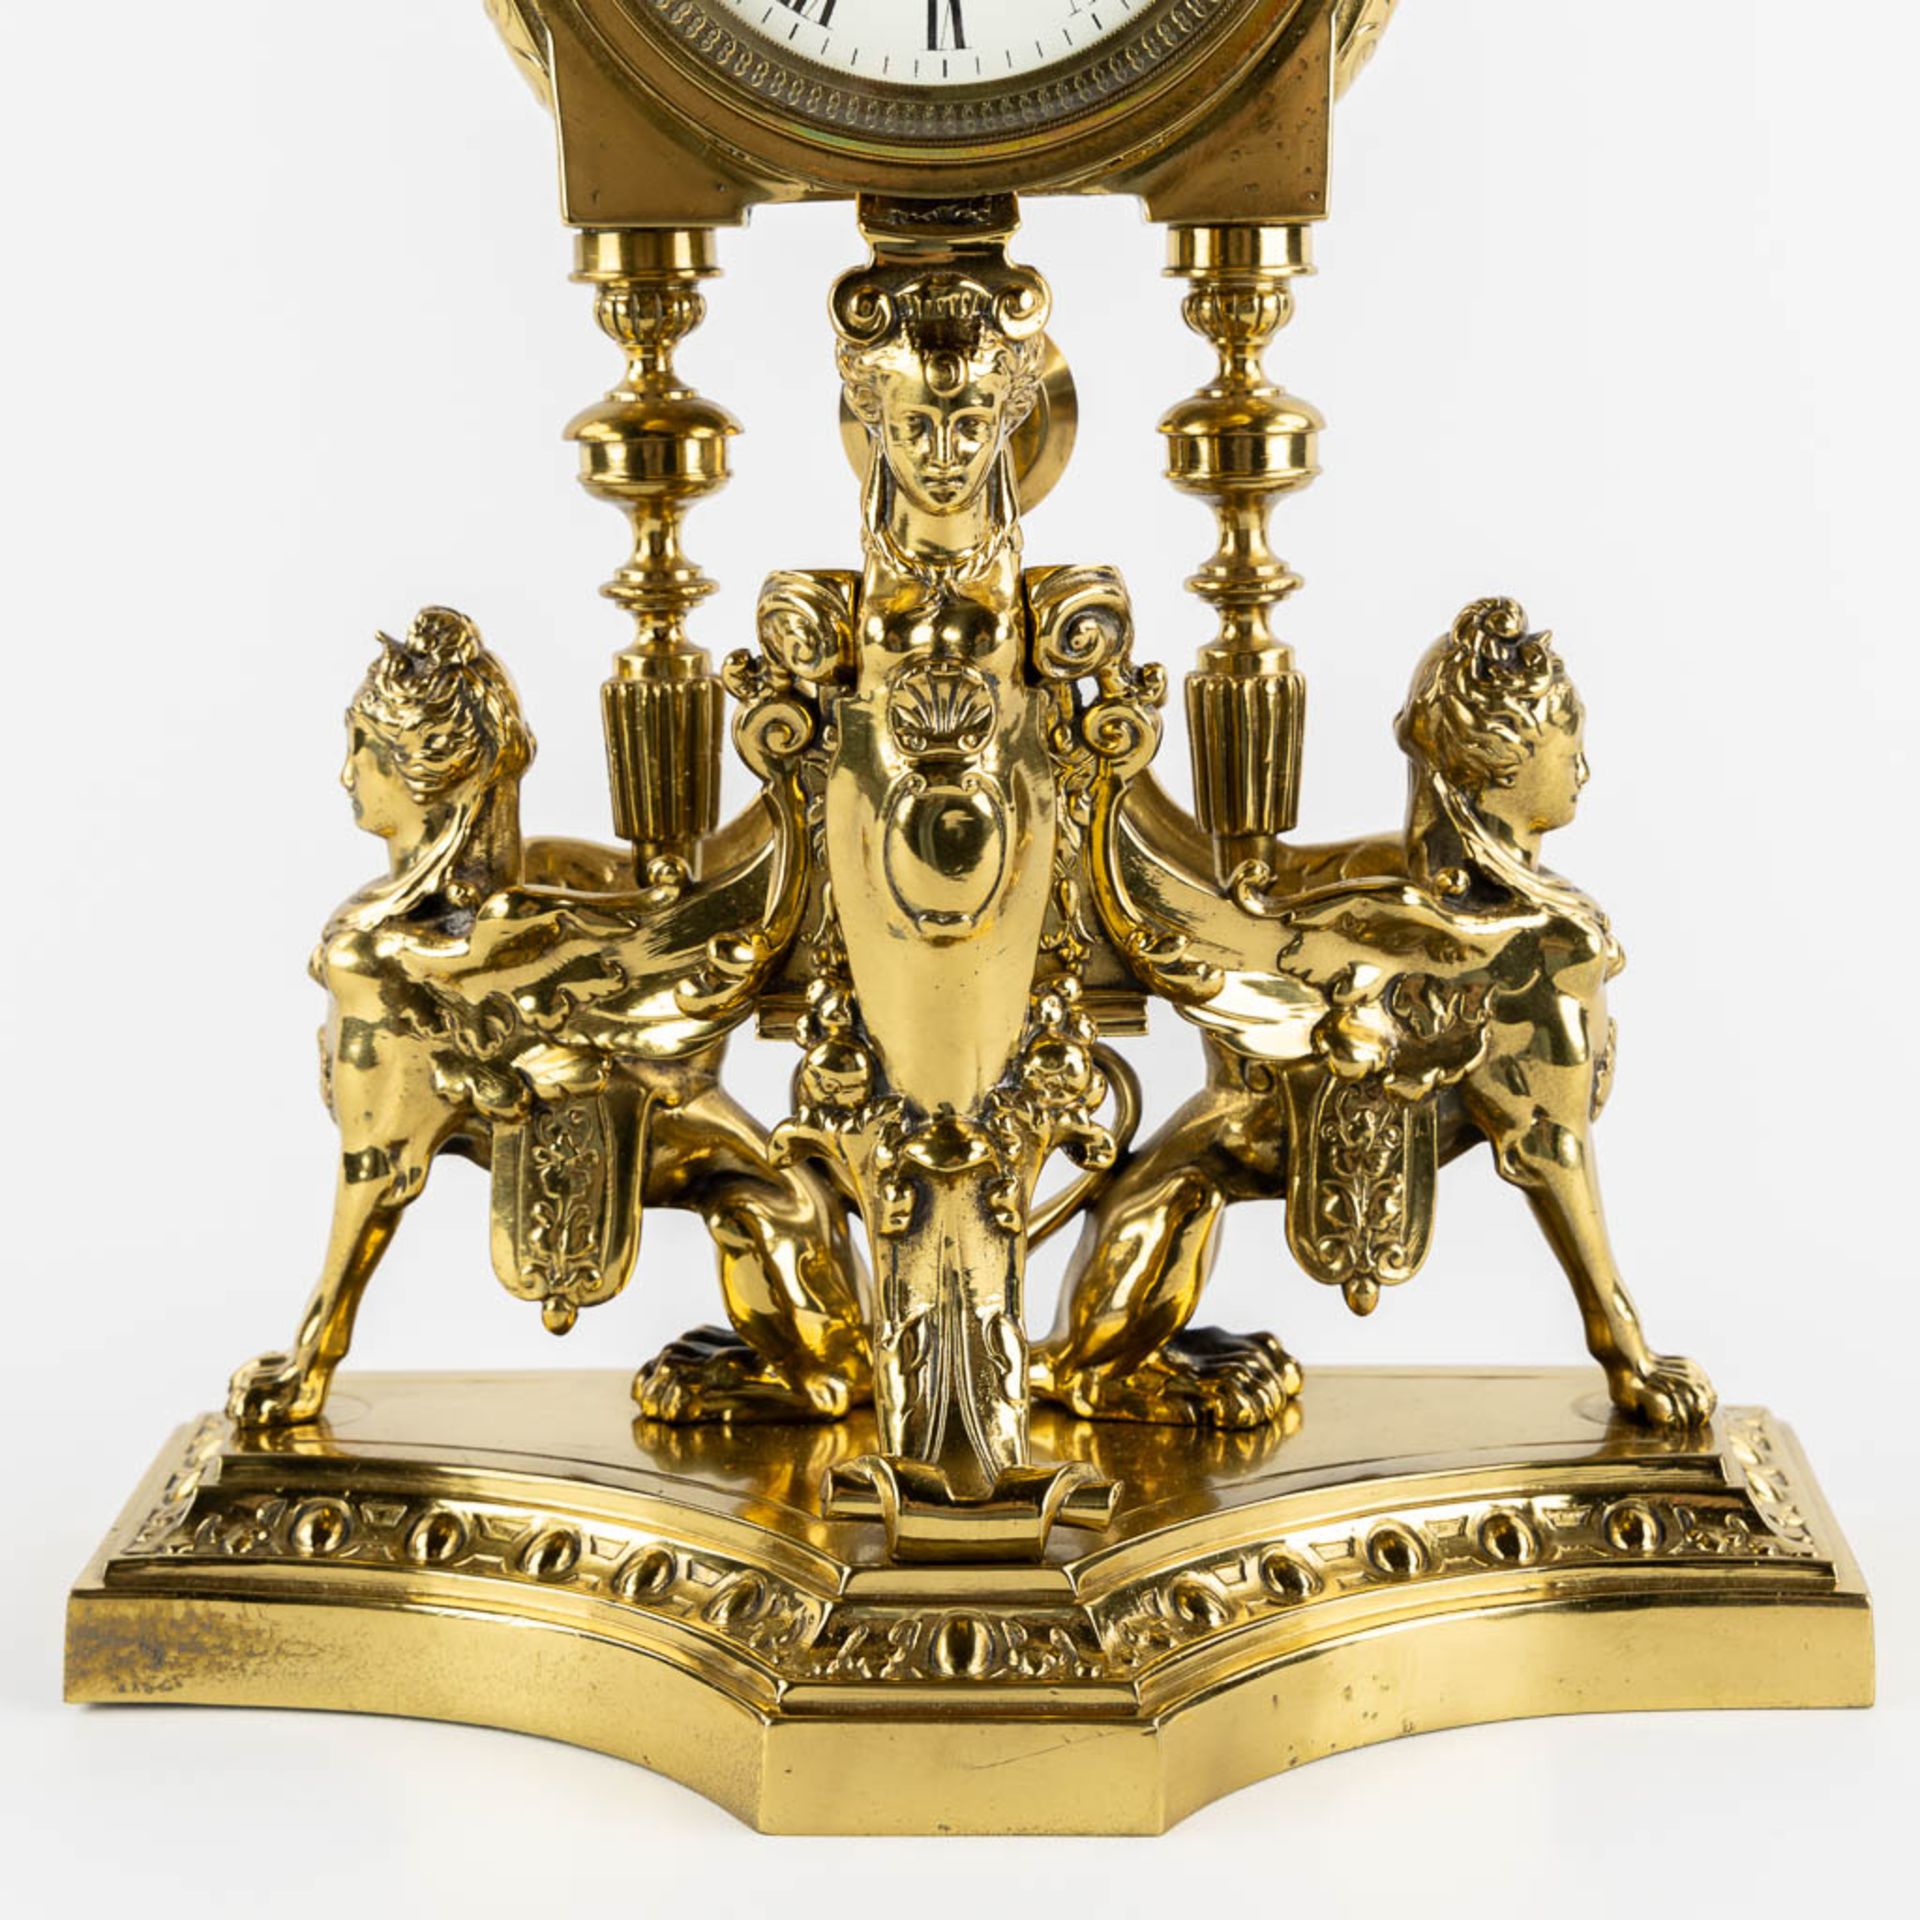 A mantle clock, polished bronze, decorated with Mythological Figures. Circa 1880. (L:15 x W:26 x H:4 - Image 9 of 12